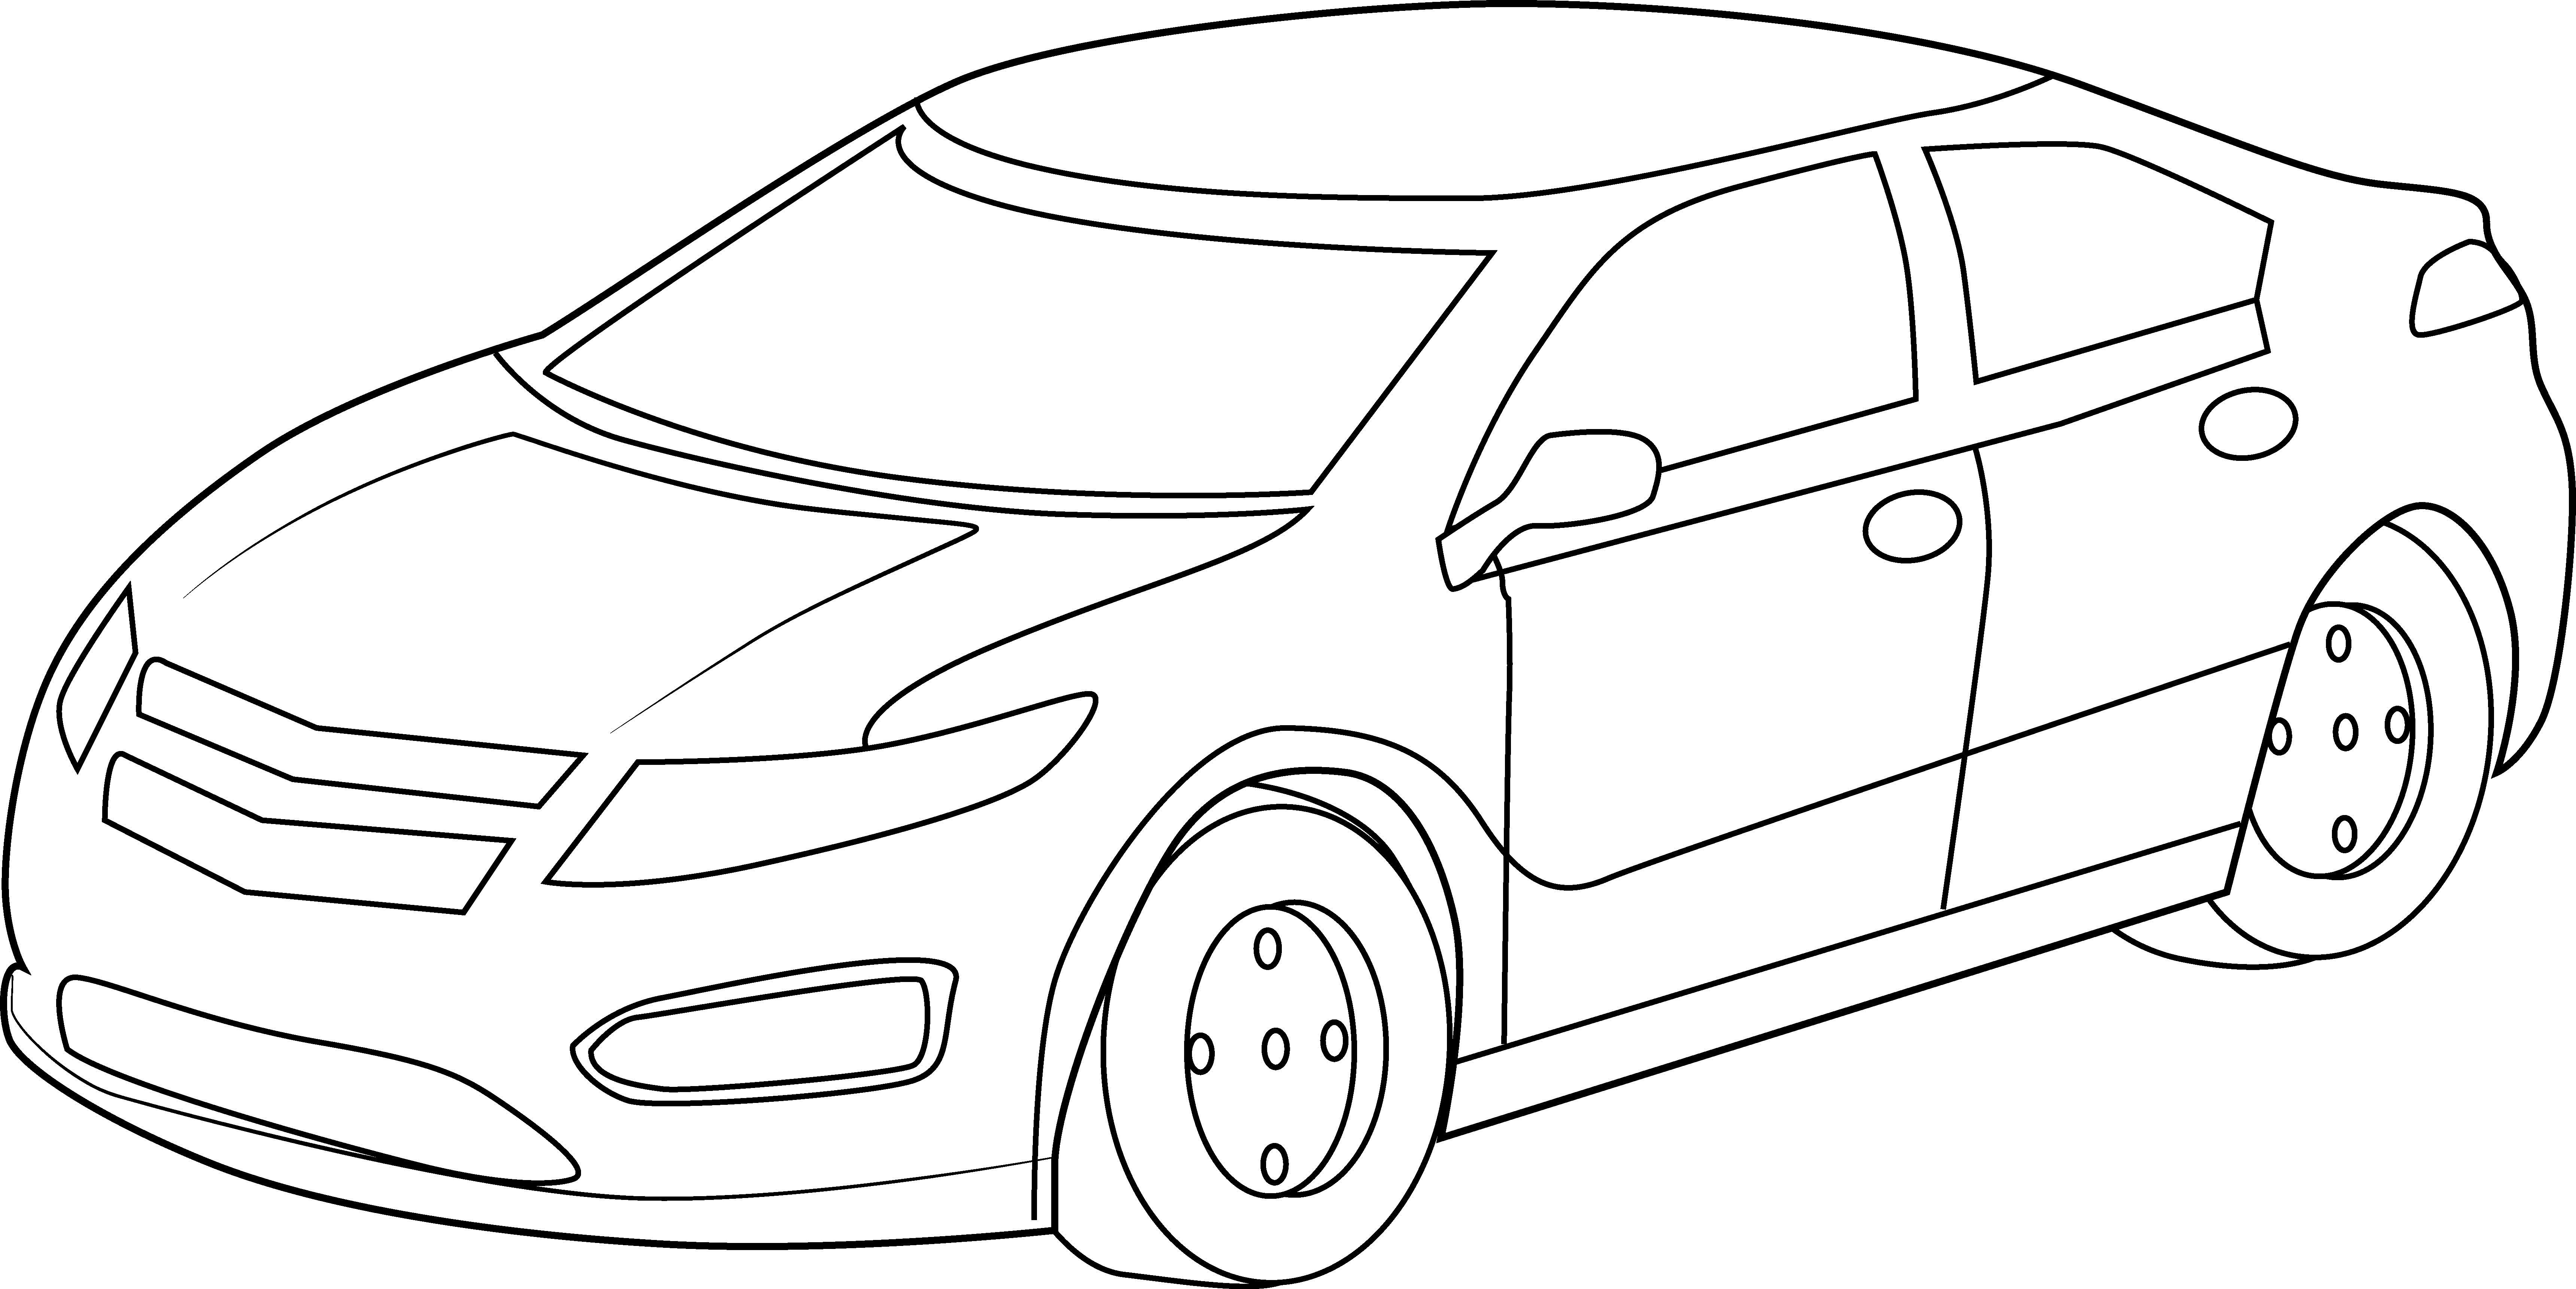 Simple Car Coloring Pages at Free printable